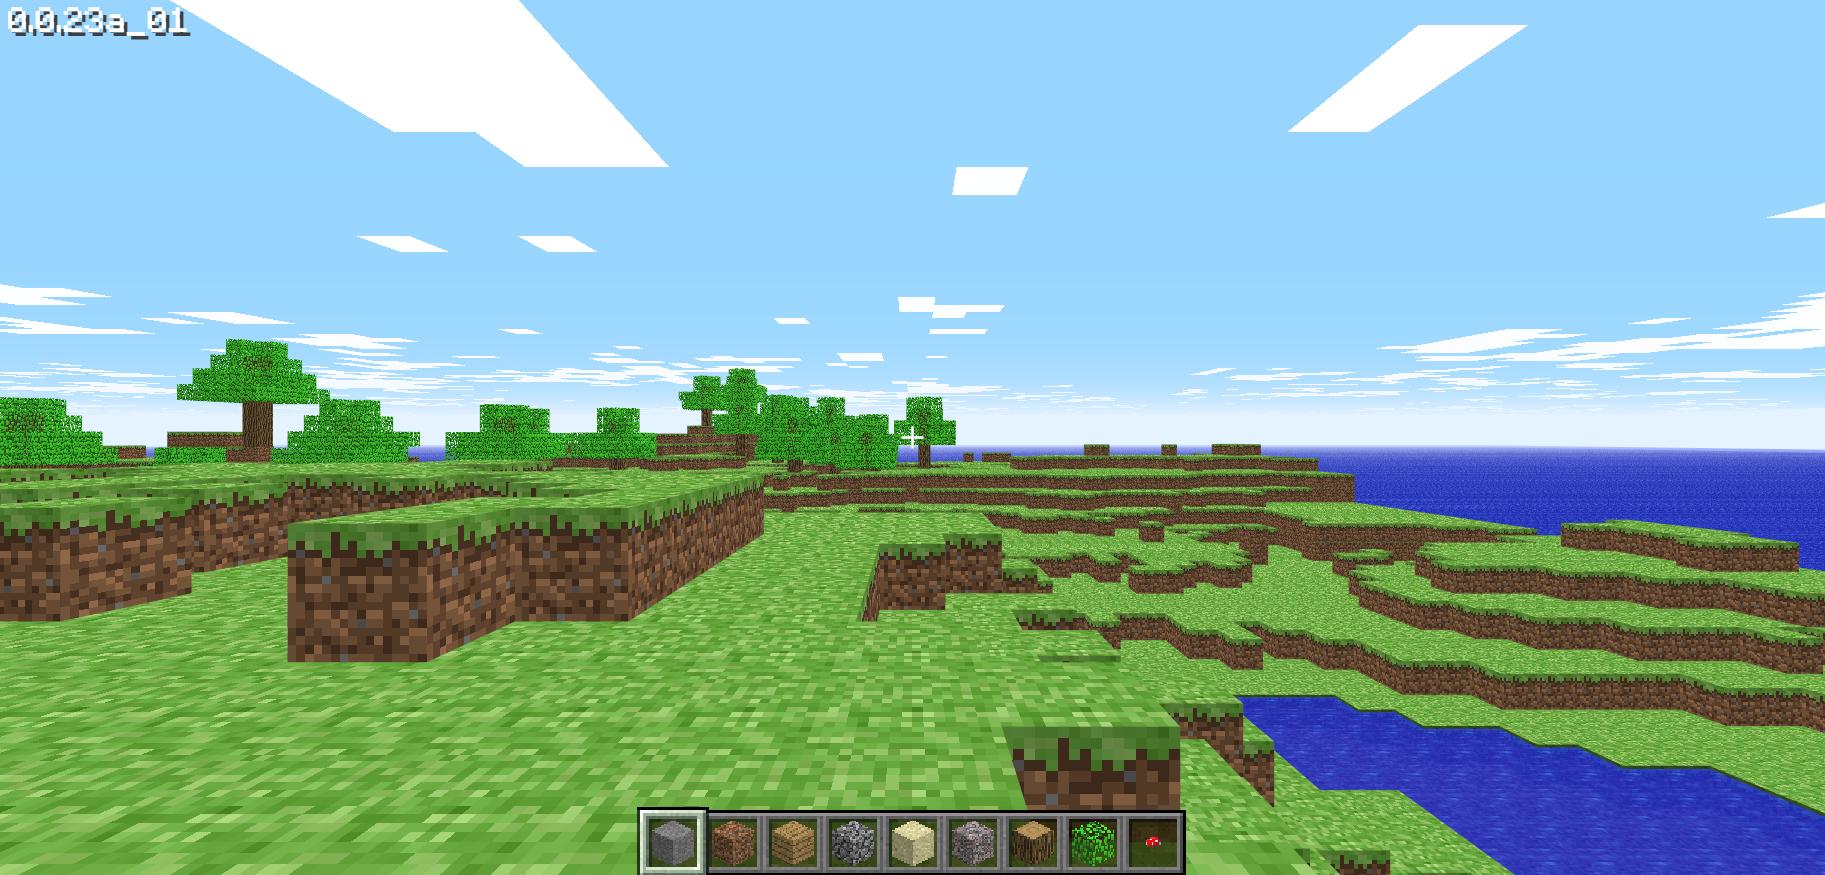 How to build in Minecraft Classic on browser